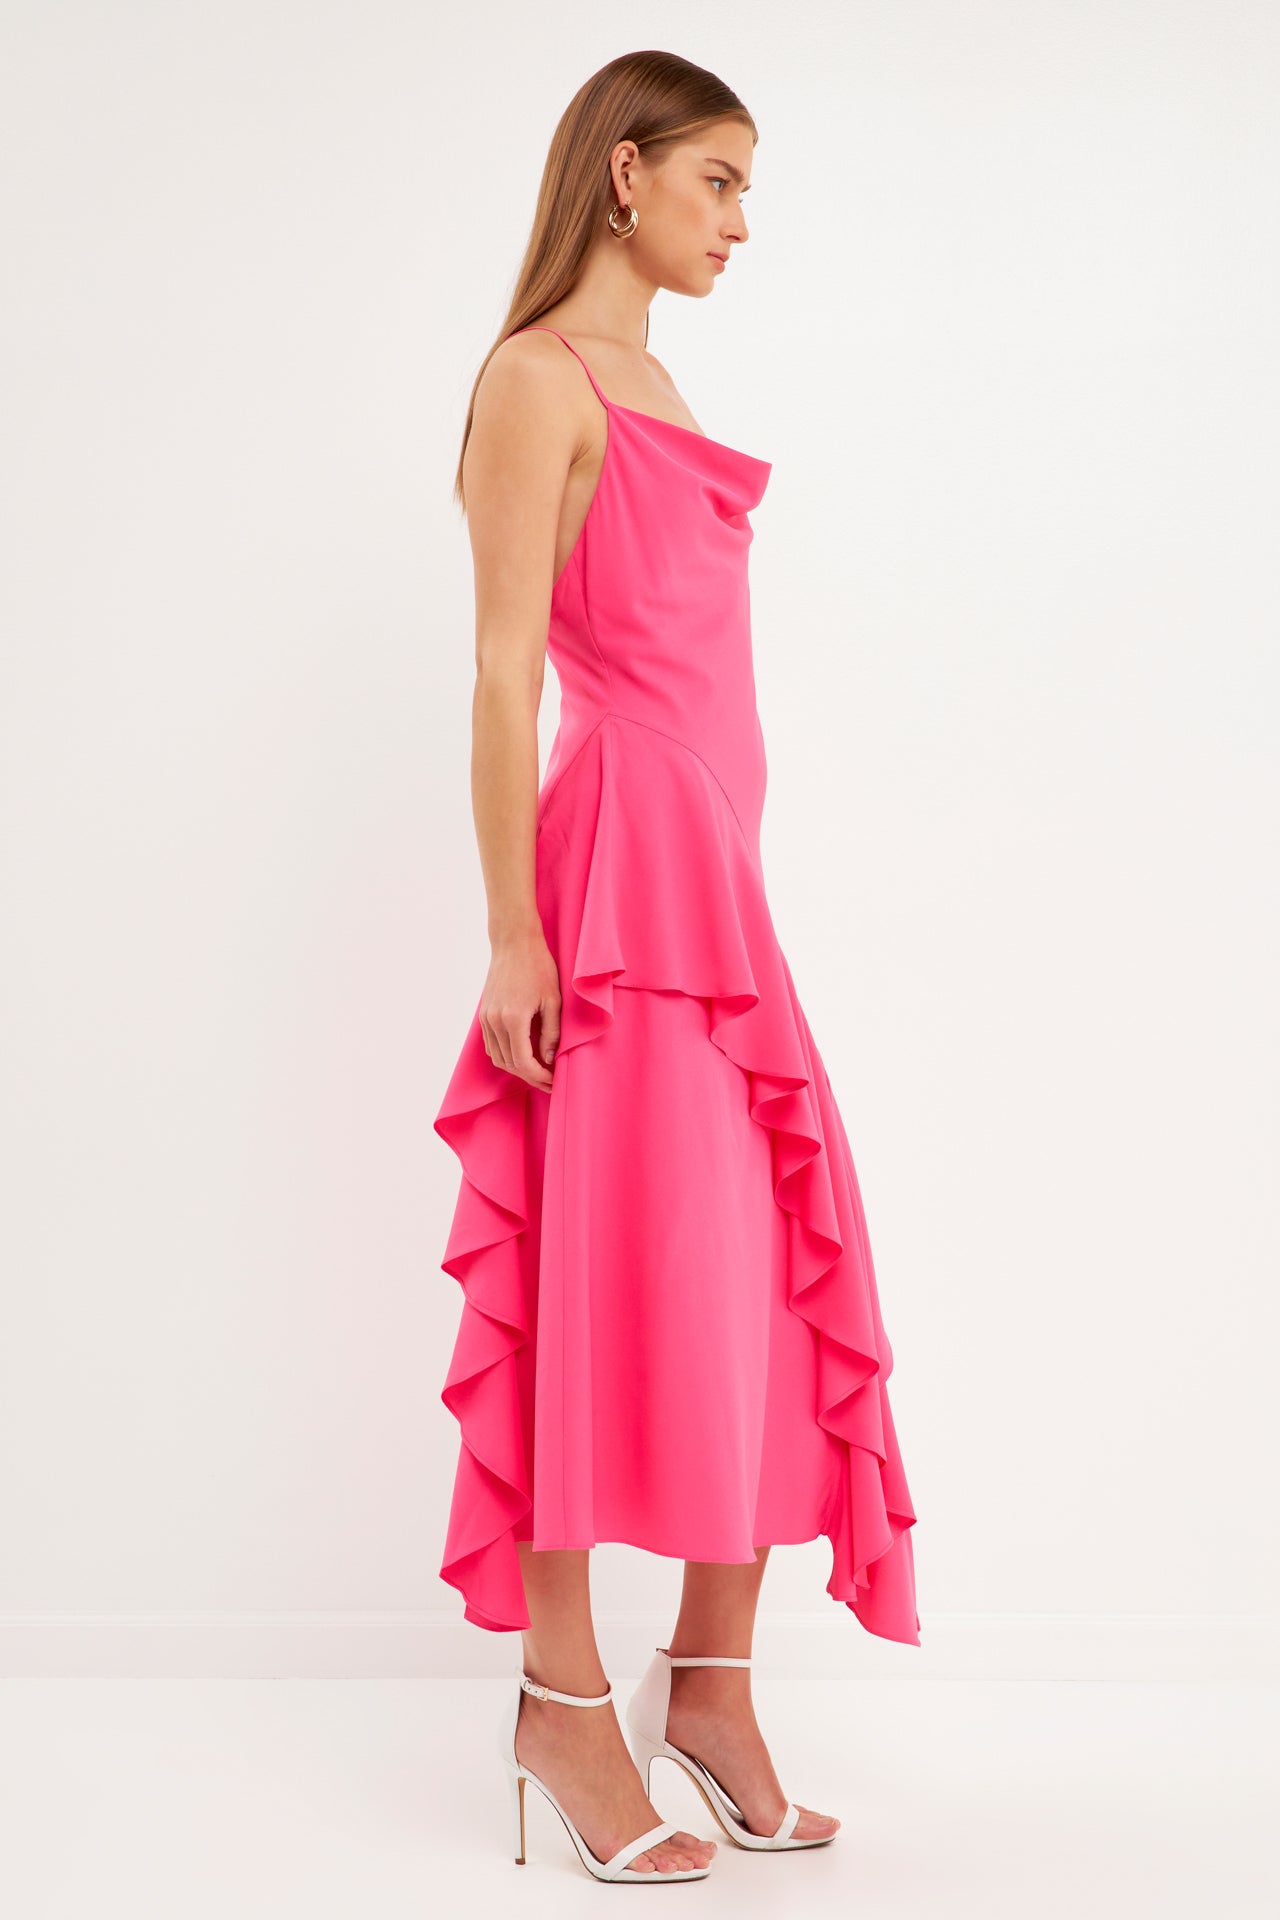 ENDLESS ROSE - Waterfall Maxi Dress - DRESSES available at Objectrare